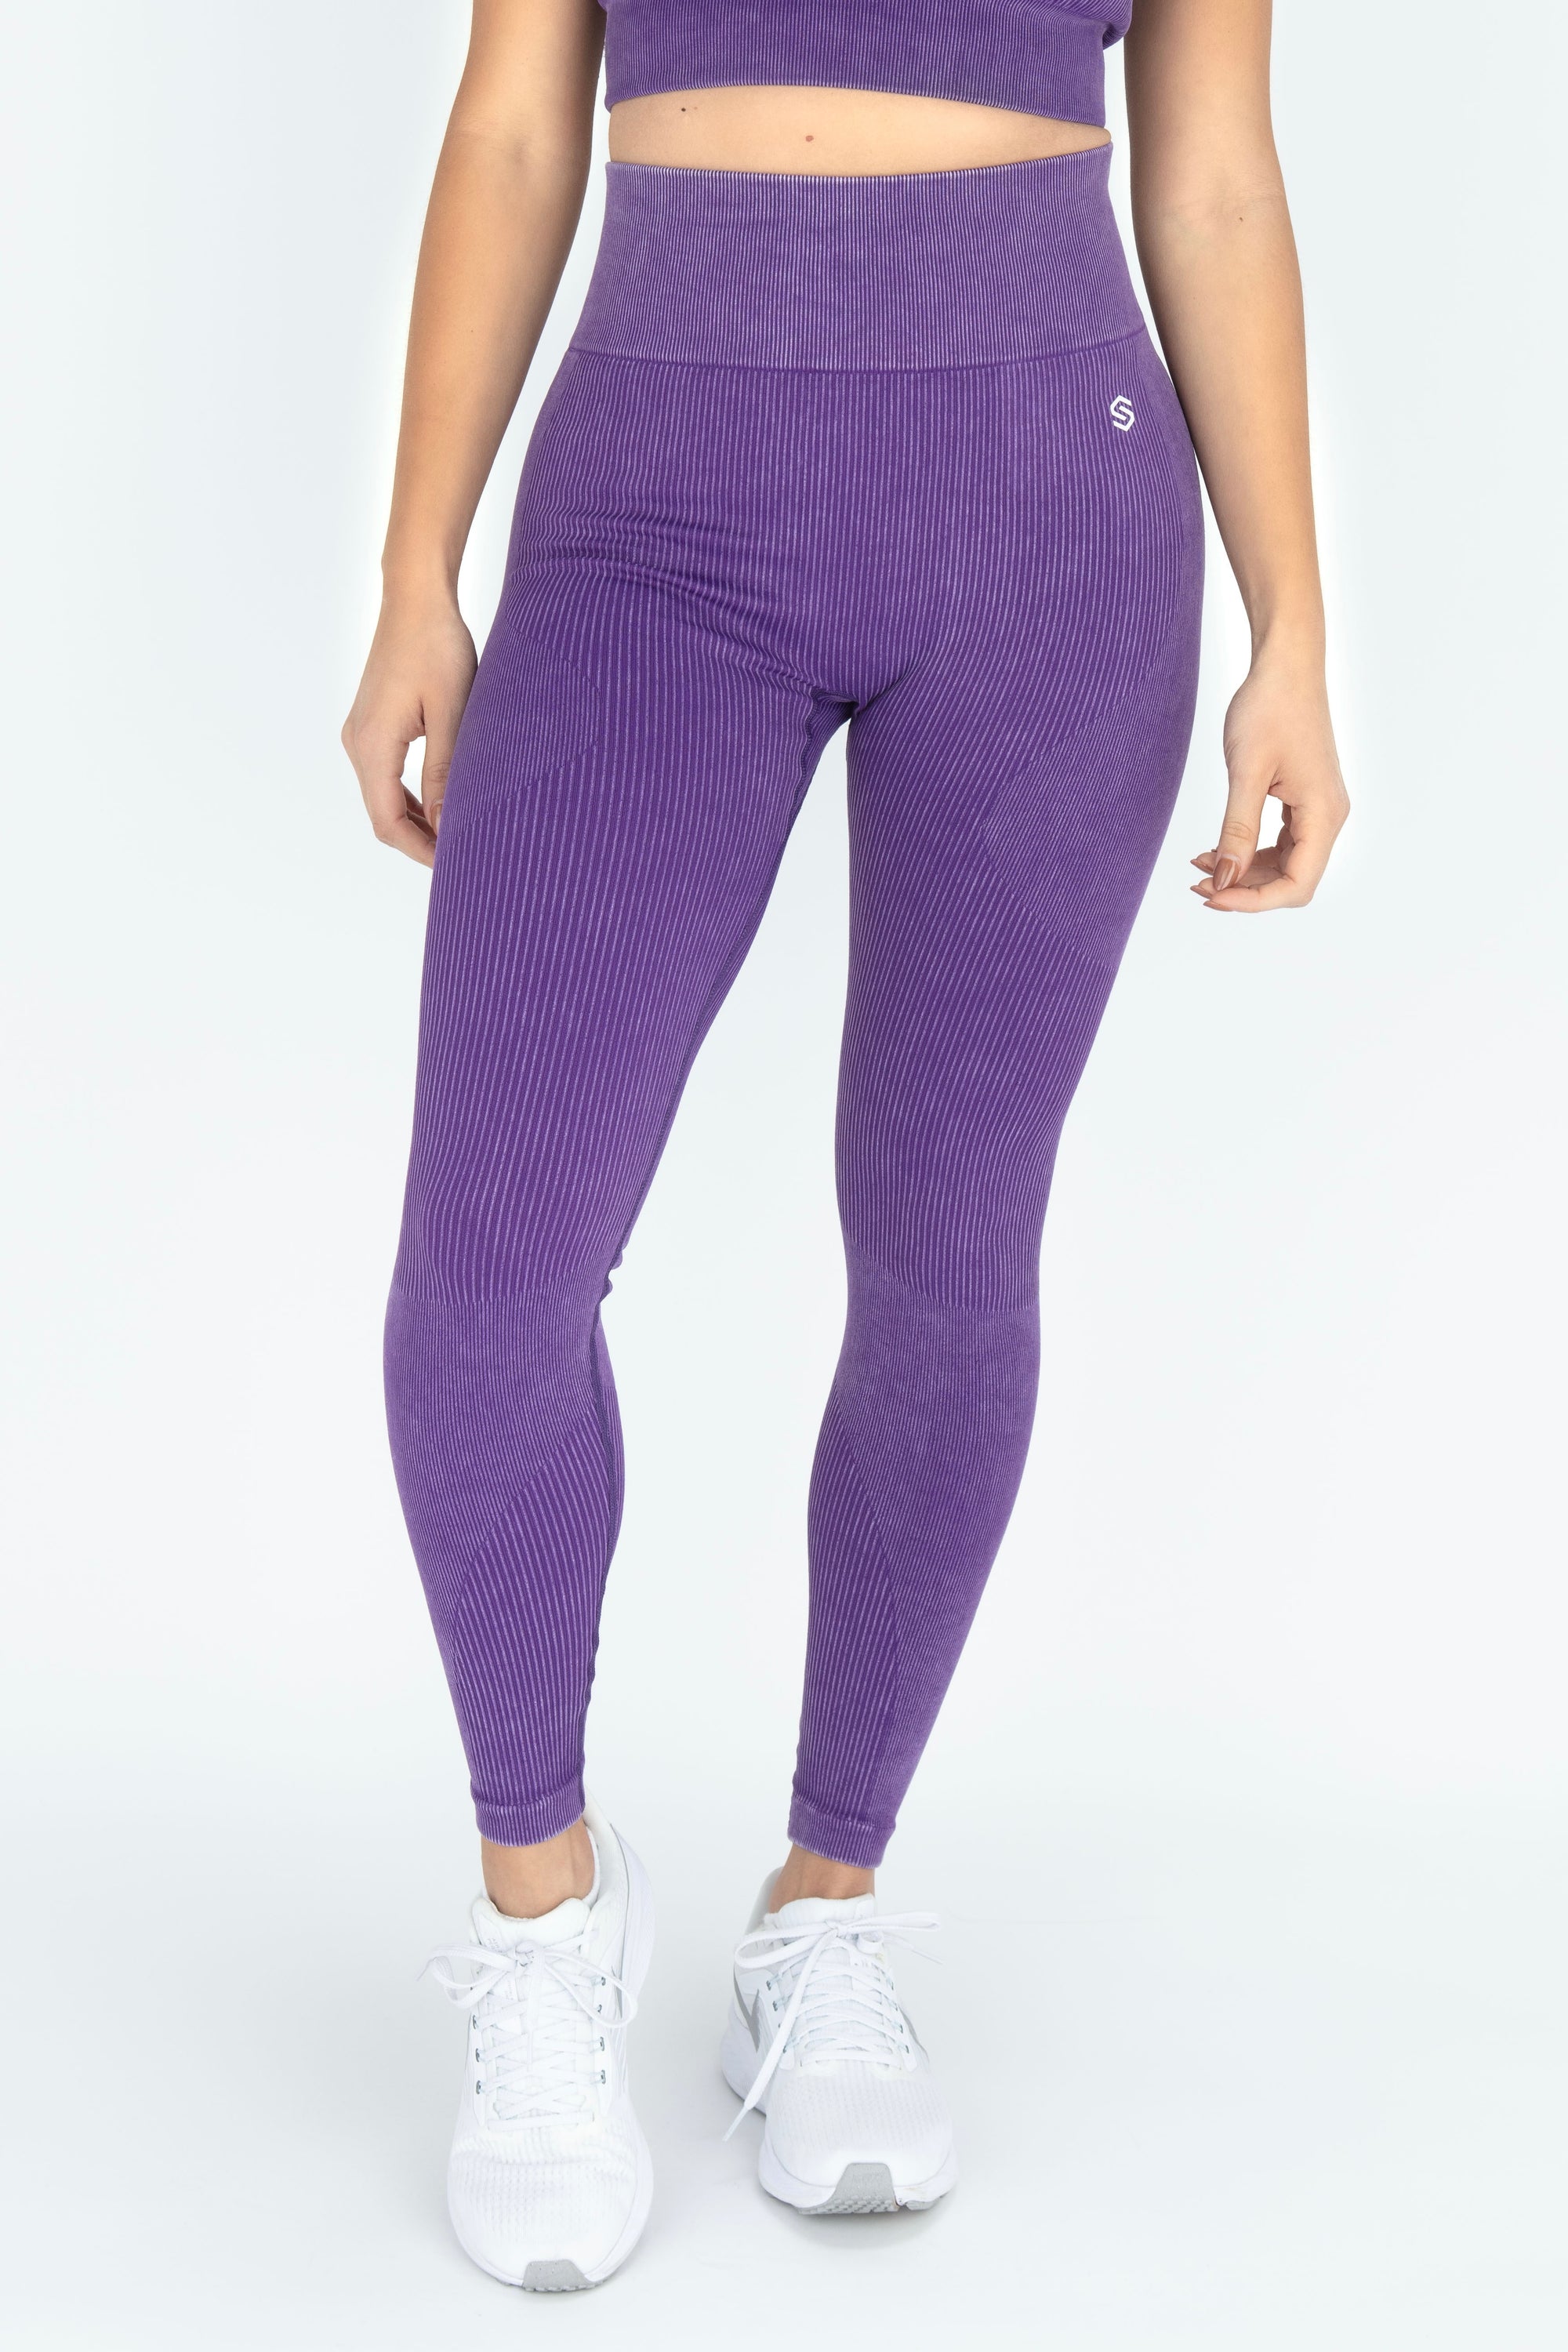 Buy the Womens Purple Ruched Hem Pull-On Activewear Ankle Leggings Size 6